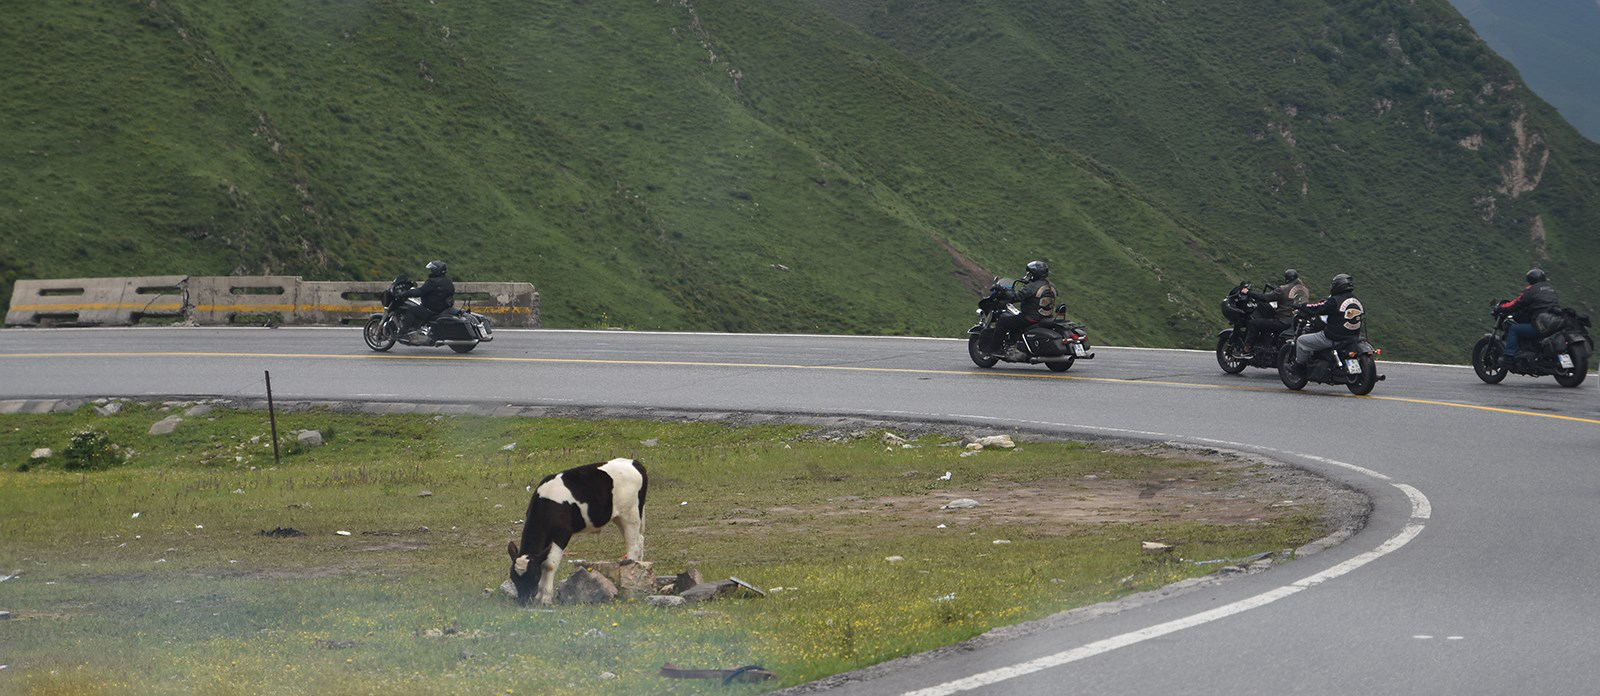 Rental Motorbike Tour from Sichuan to Tibet on 318 Highway